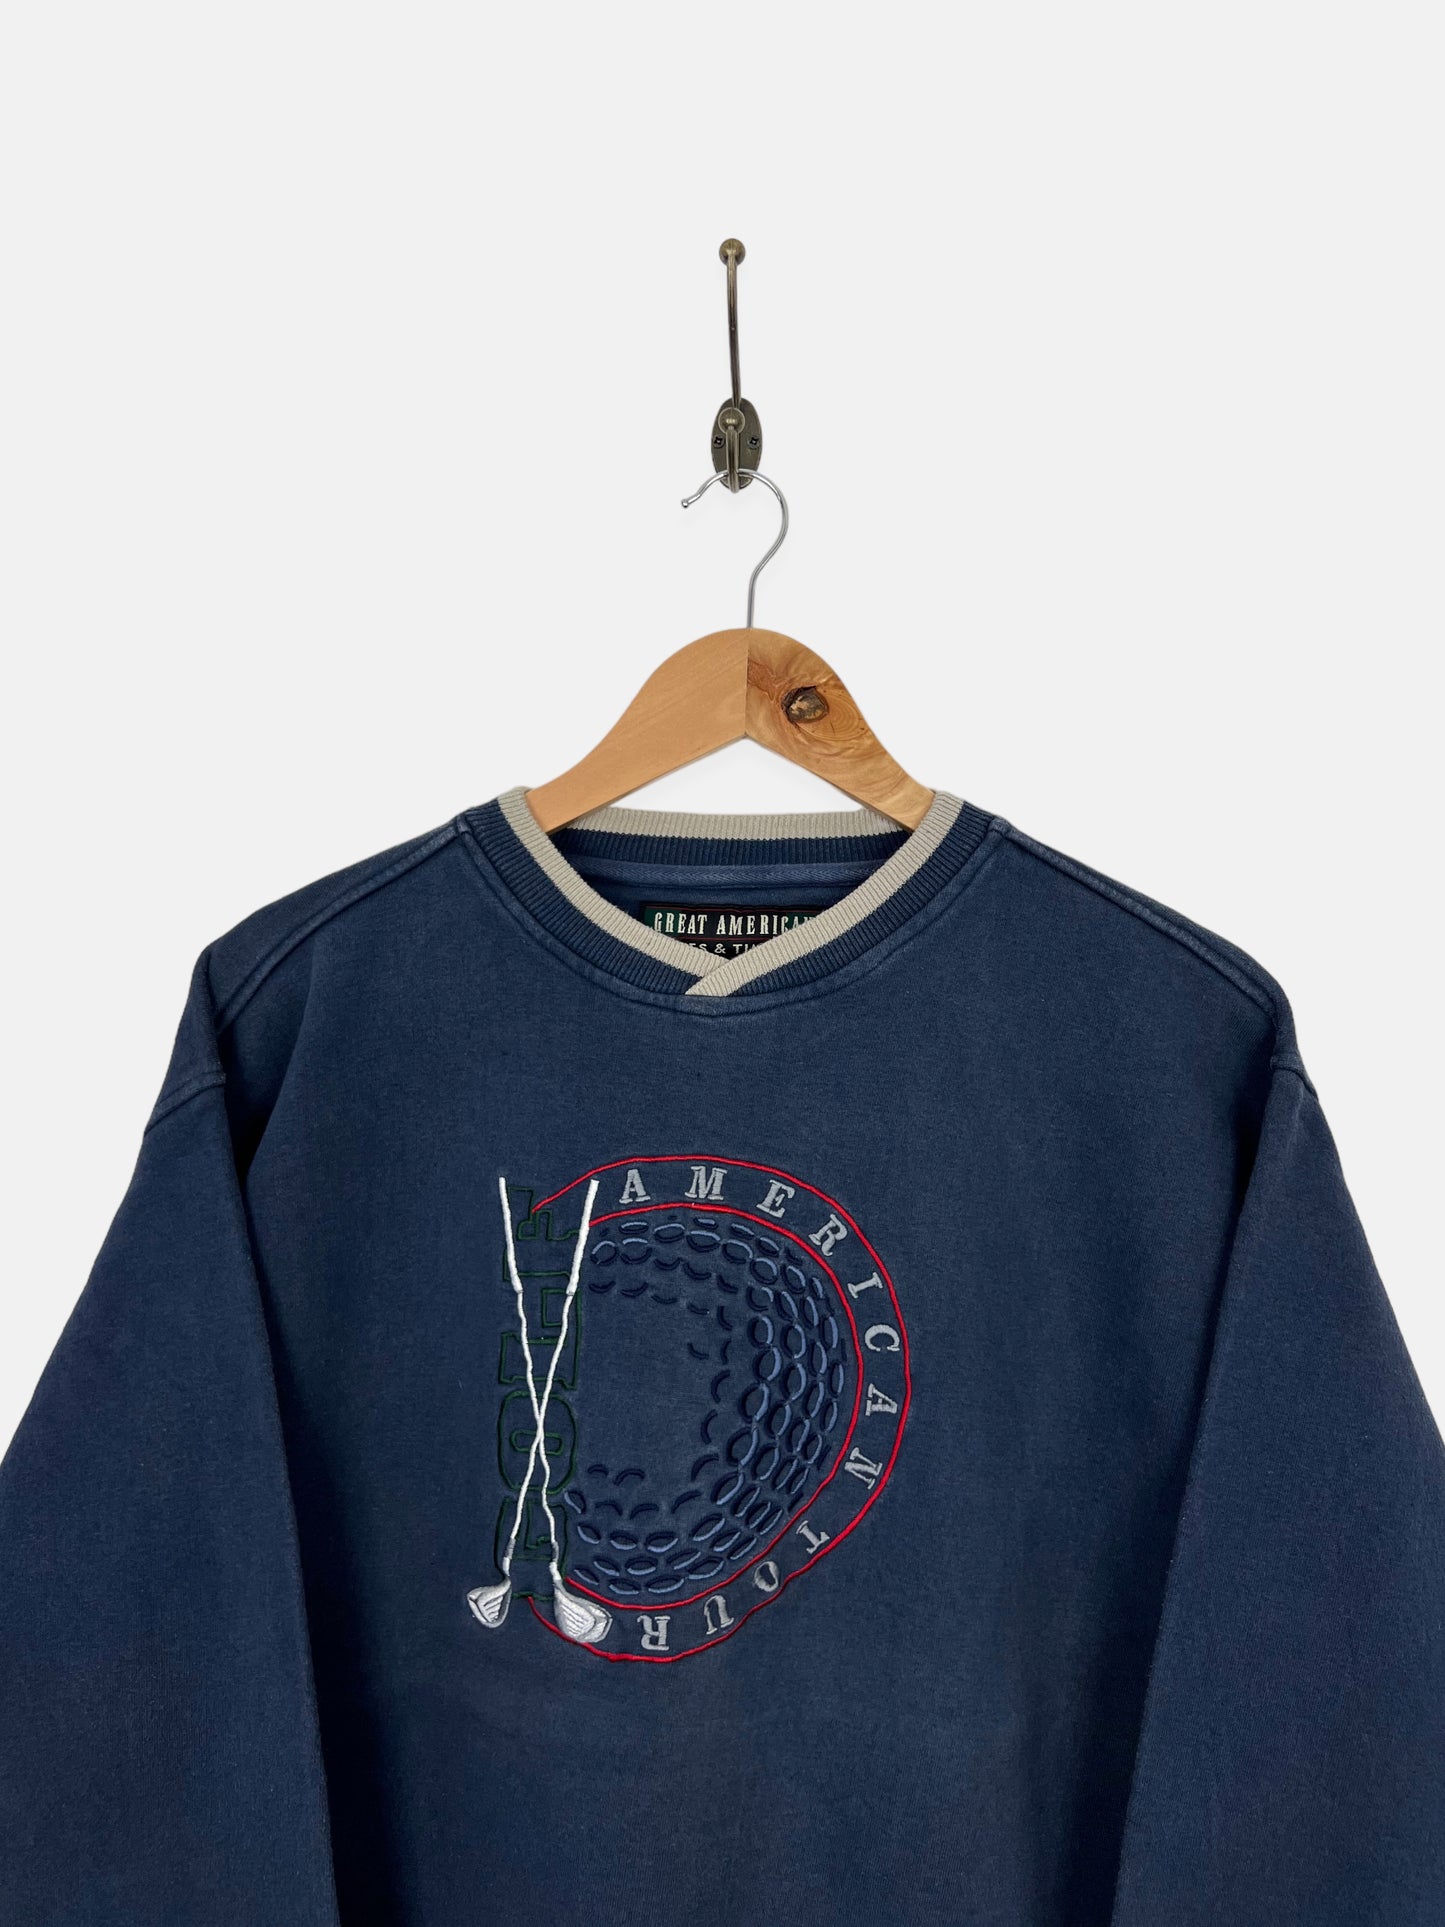 90's American Golf Tour Embroidered Vintage Sweatshirt Size 10-12